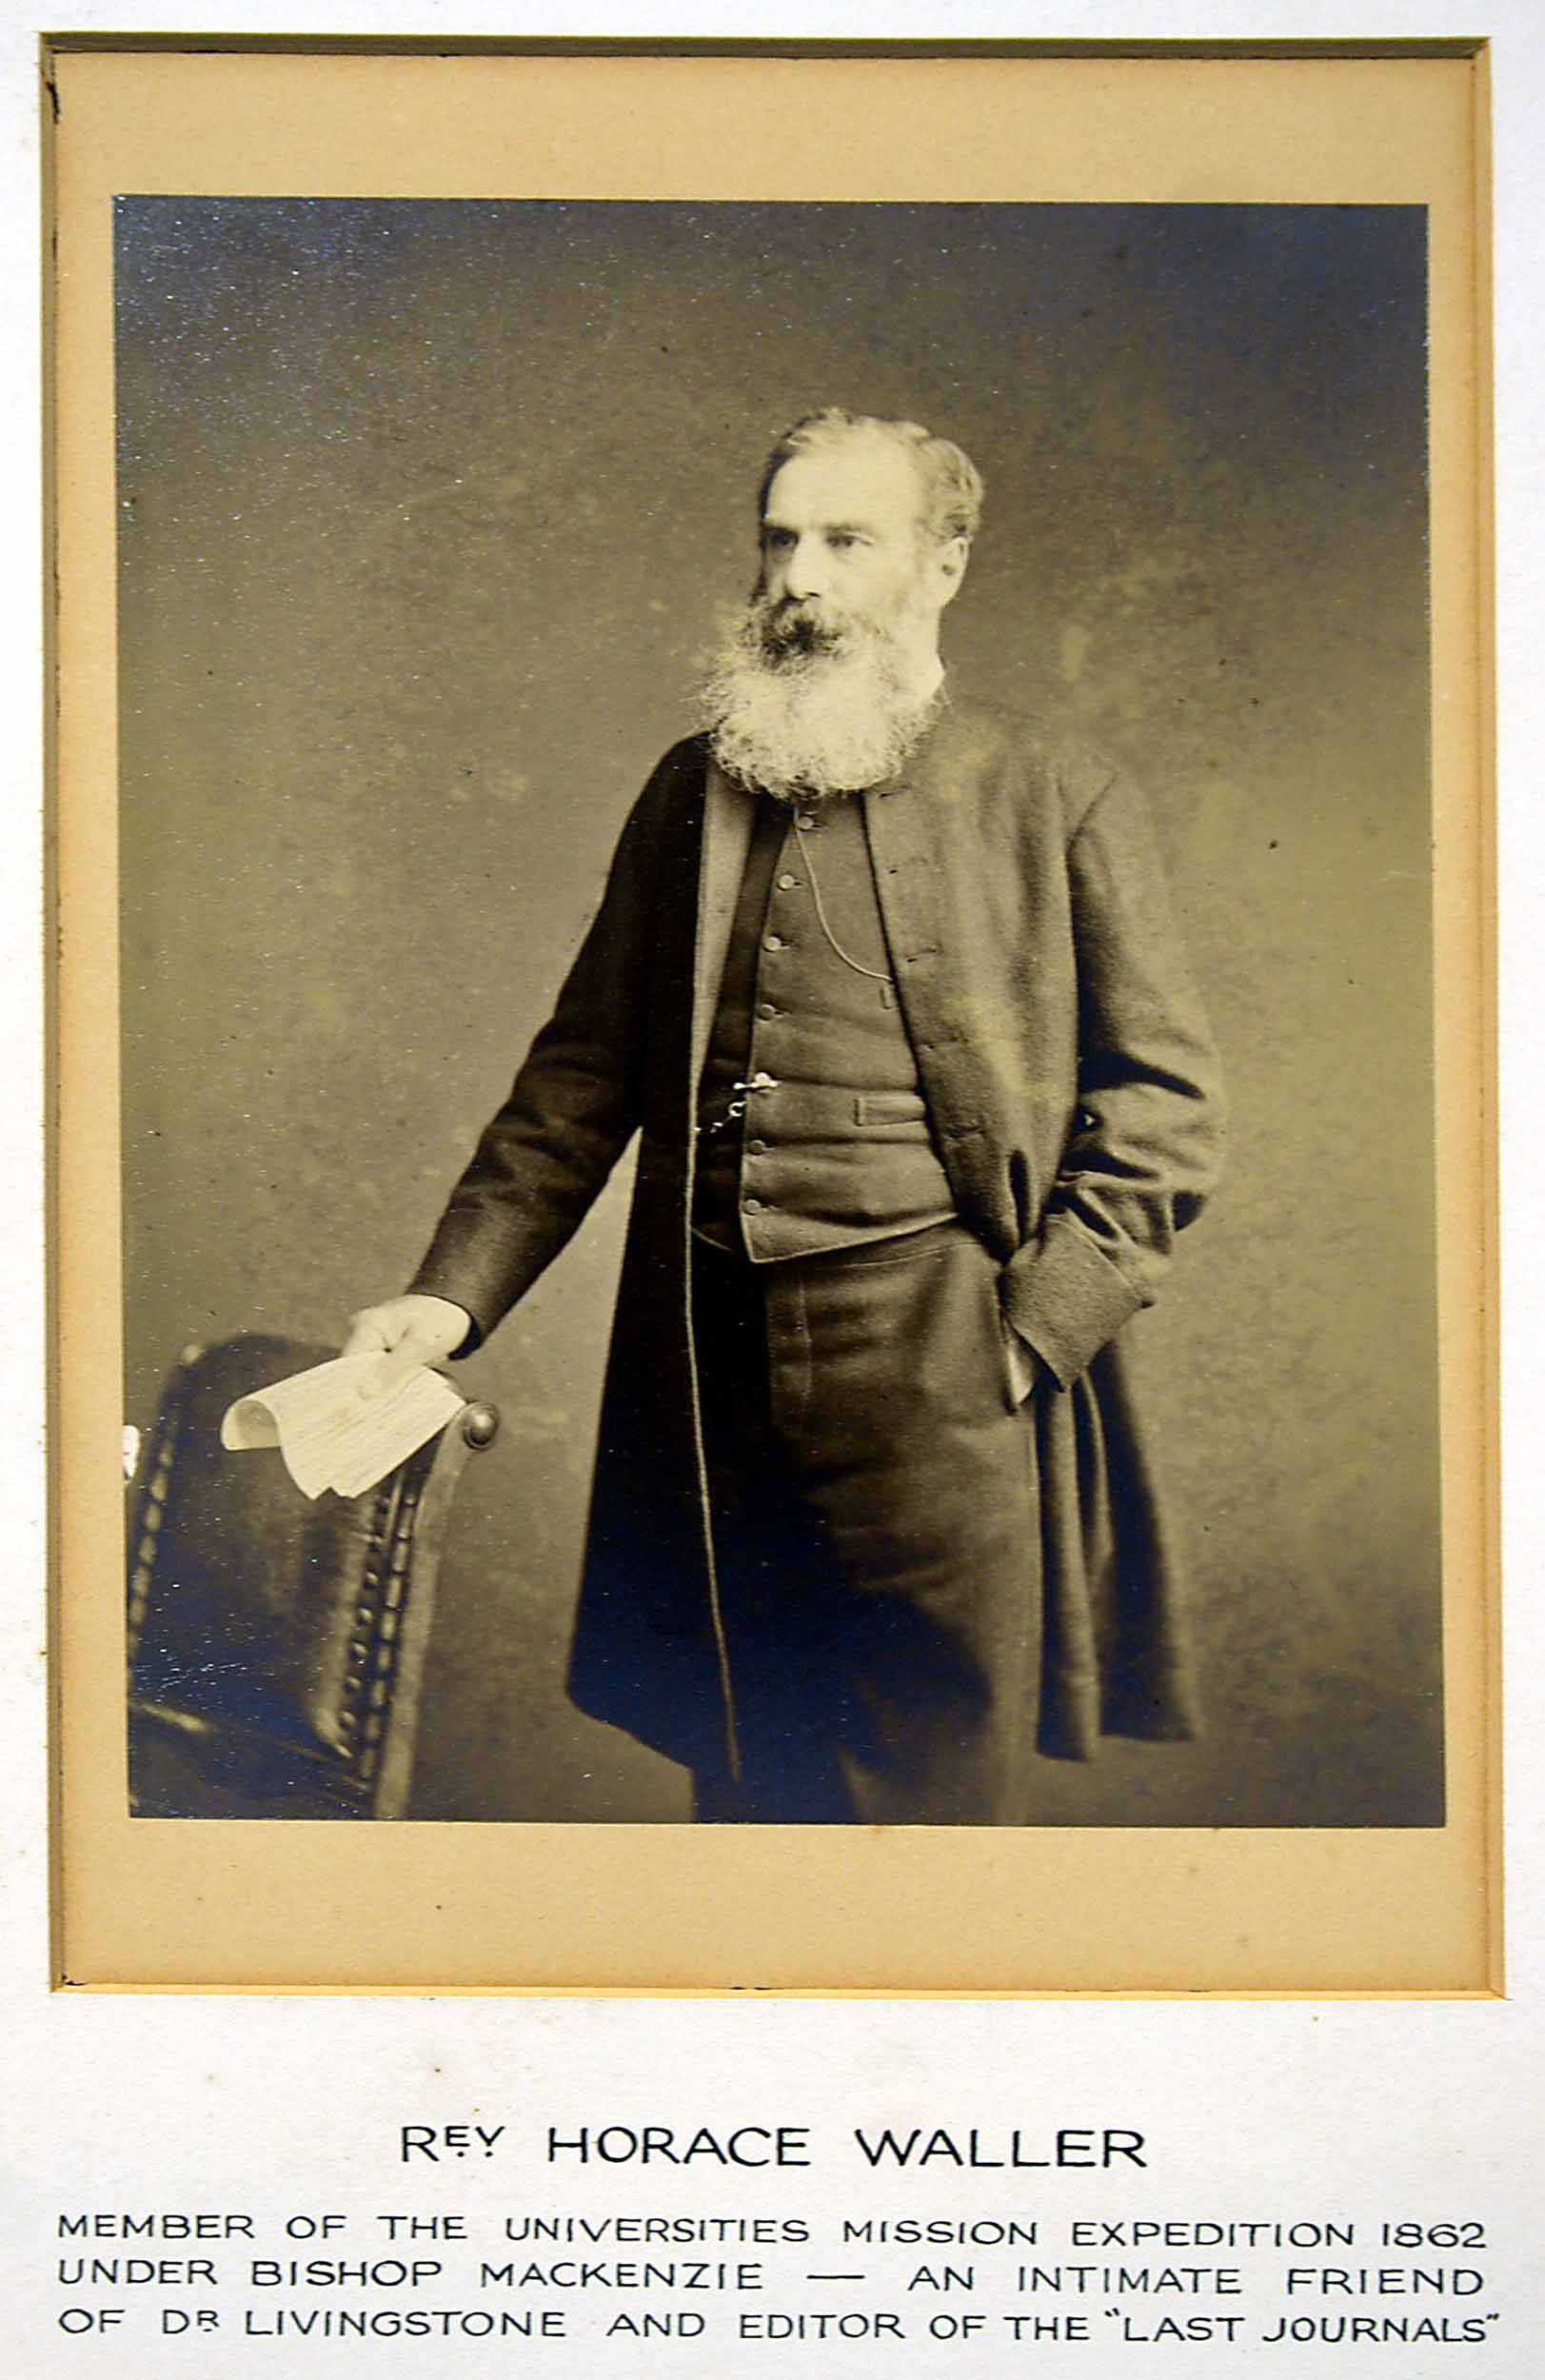 Photograph of Horace Waller. Copyright David Livingstone Centre. Object images used by permission. May not be reproduced without the express written consent of the National Trust for Scotland, on behalf of the Scottish National Memorial to David Livingstone Trust (David Livingstone Centre).